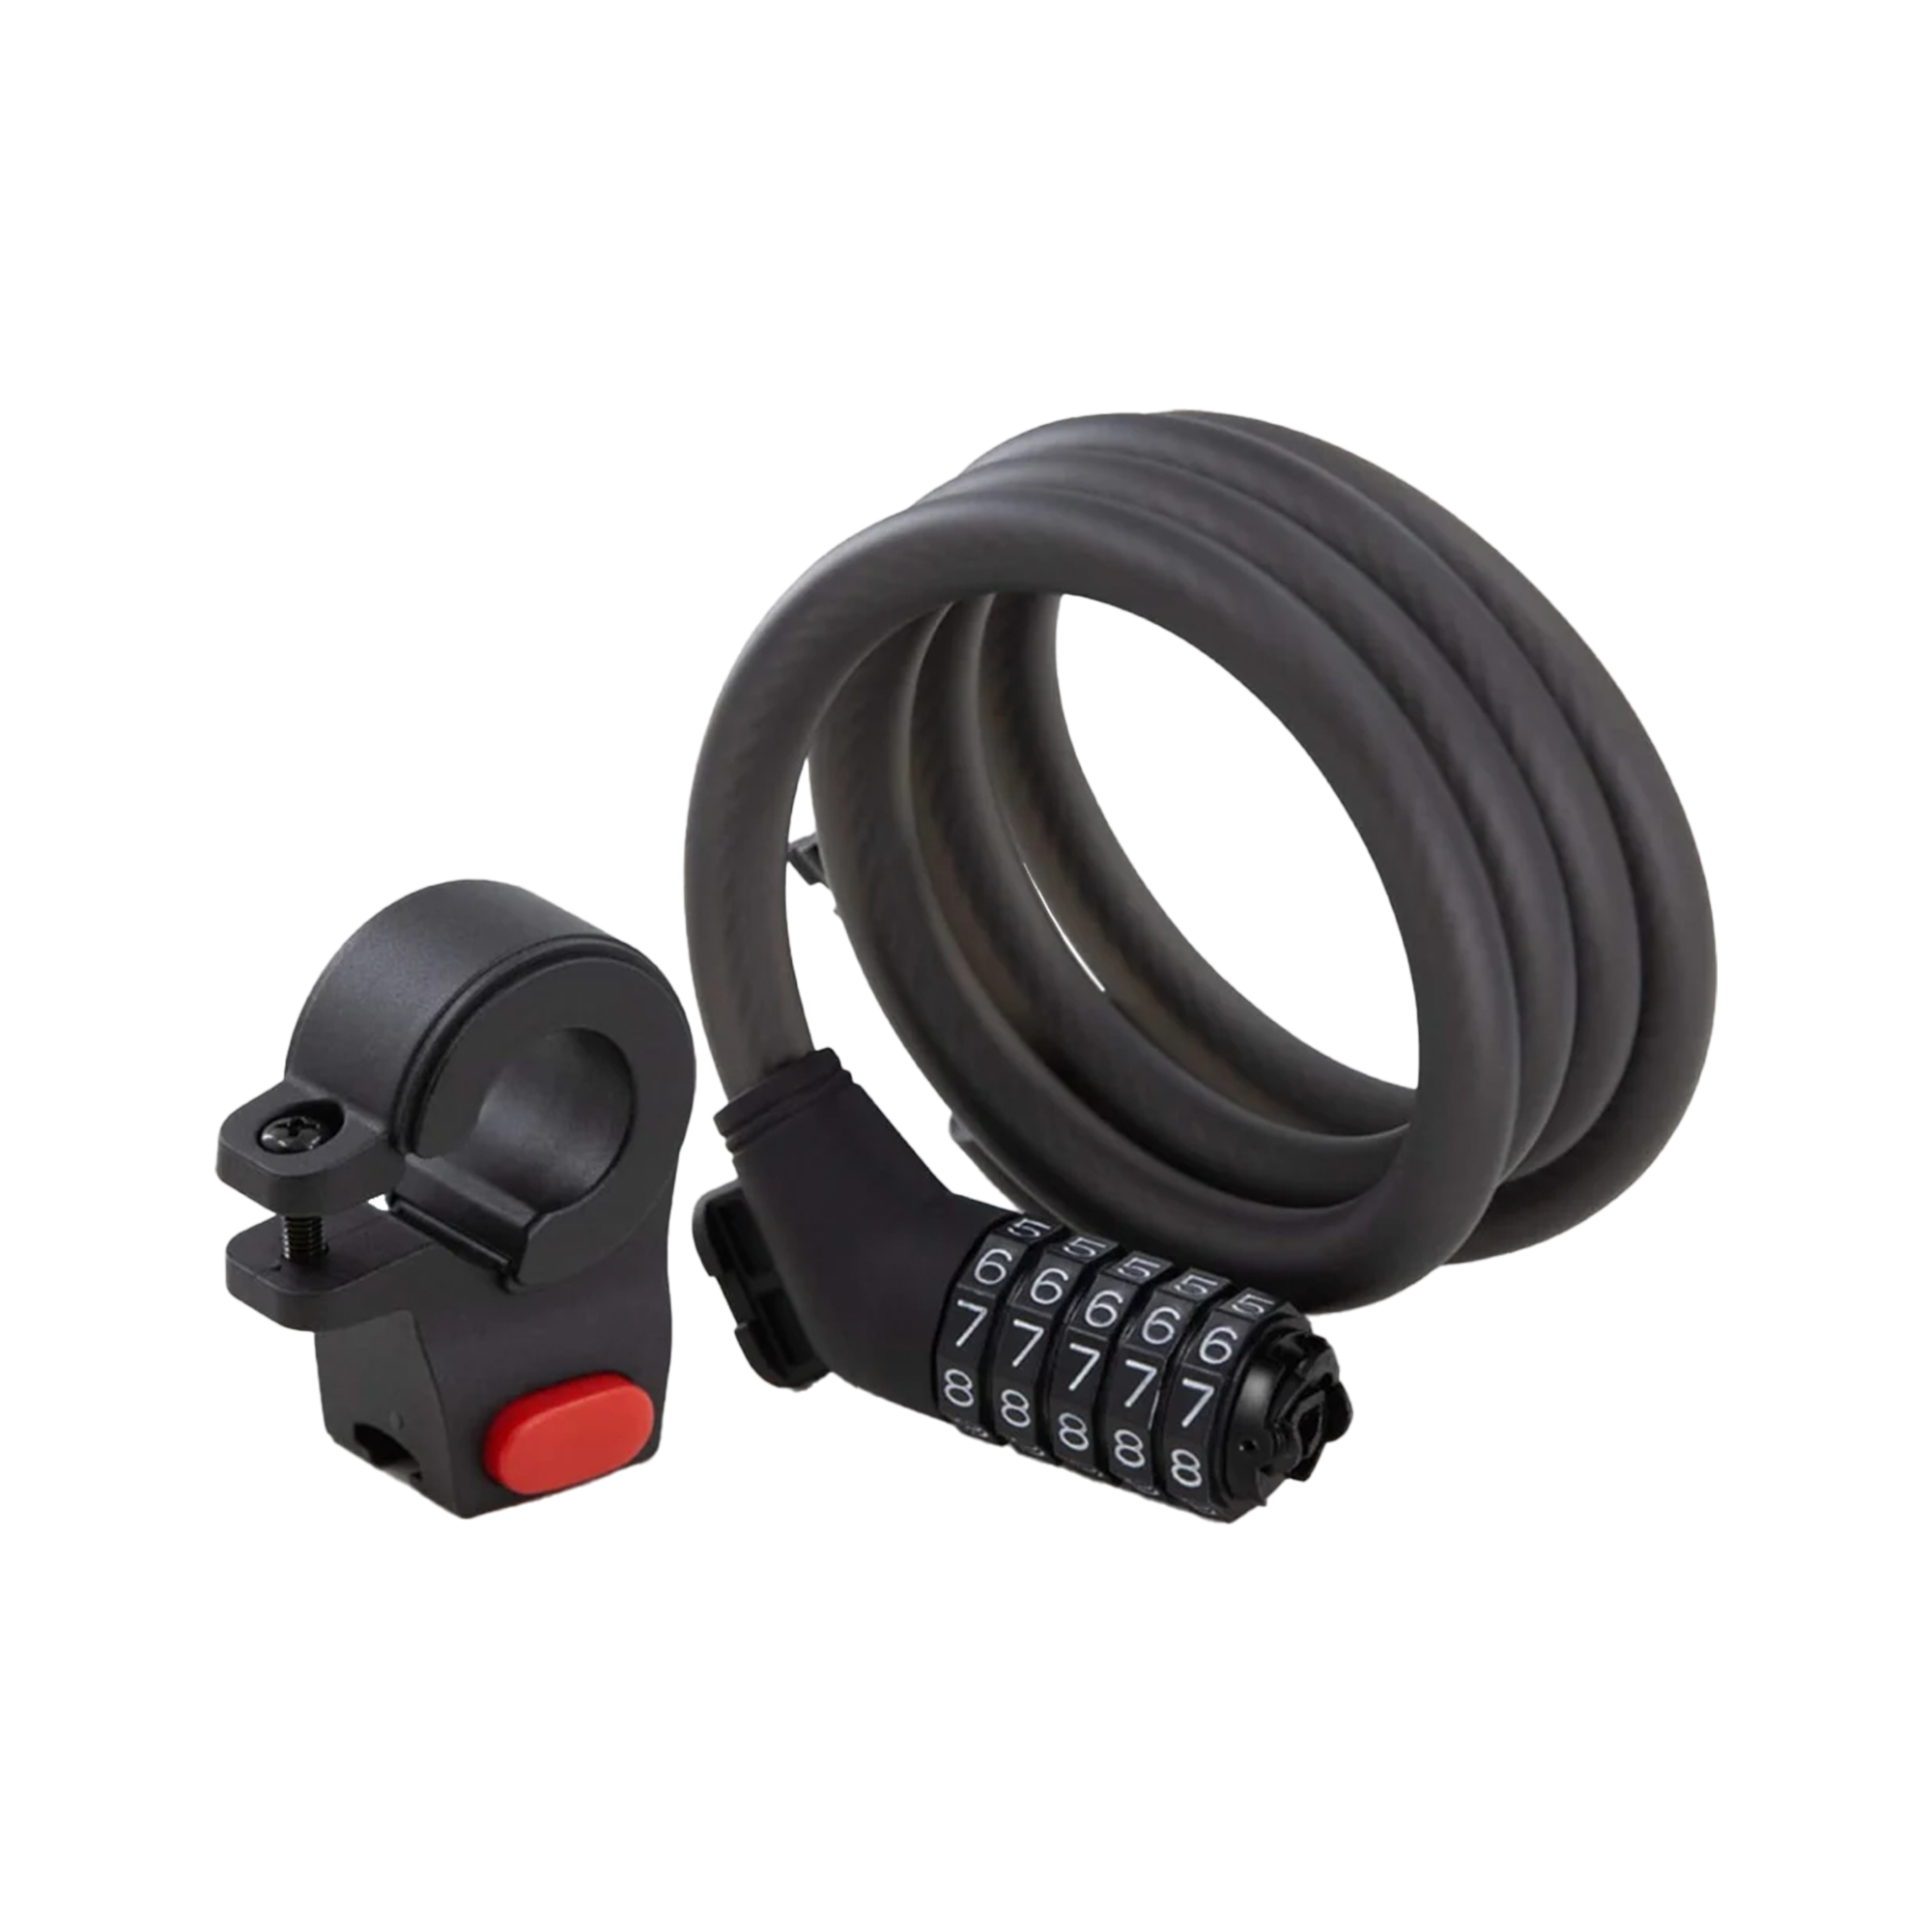 Segway Ninebot 5-Digit Combination Cable Lock